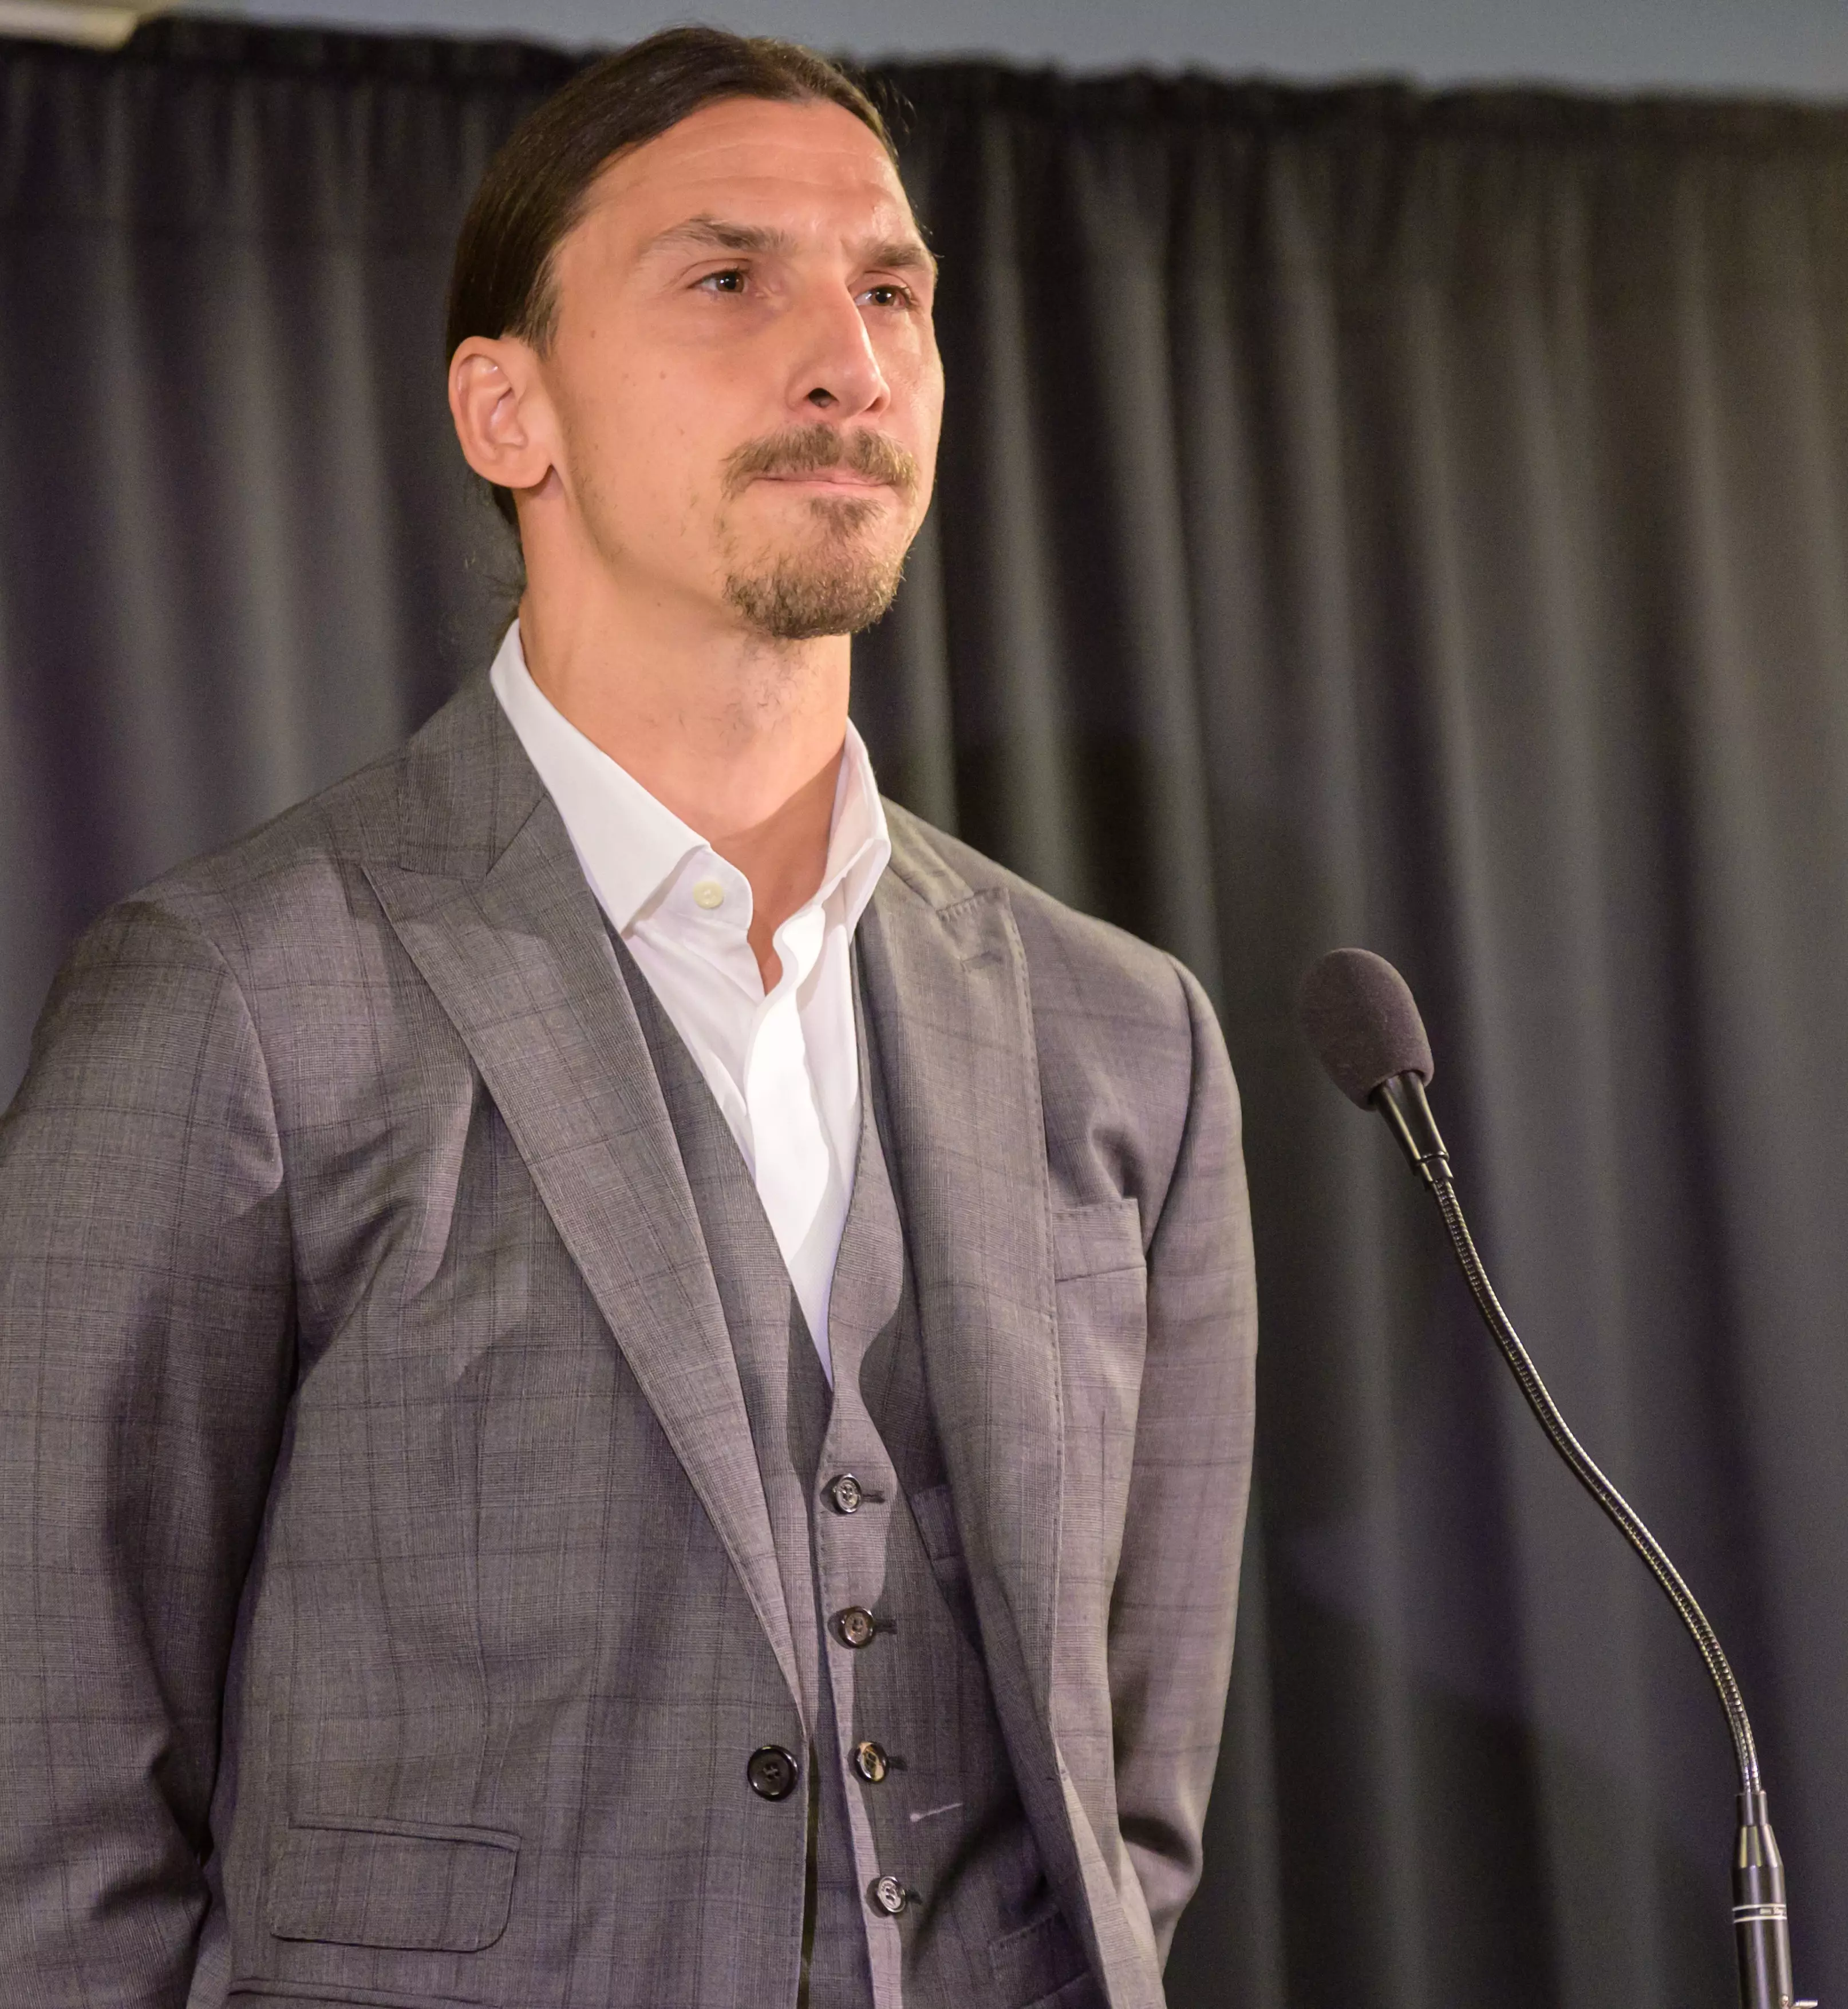 Zlatan speaking at the statue's unveiling in October. (Image